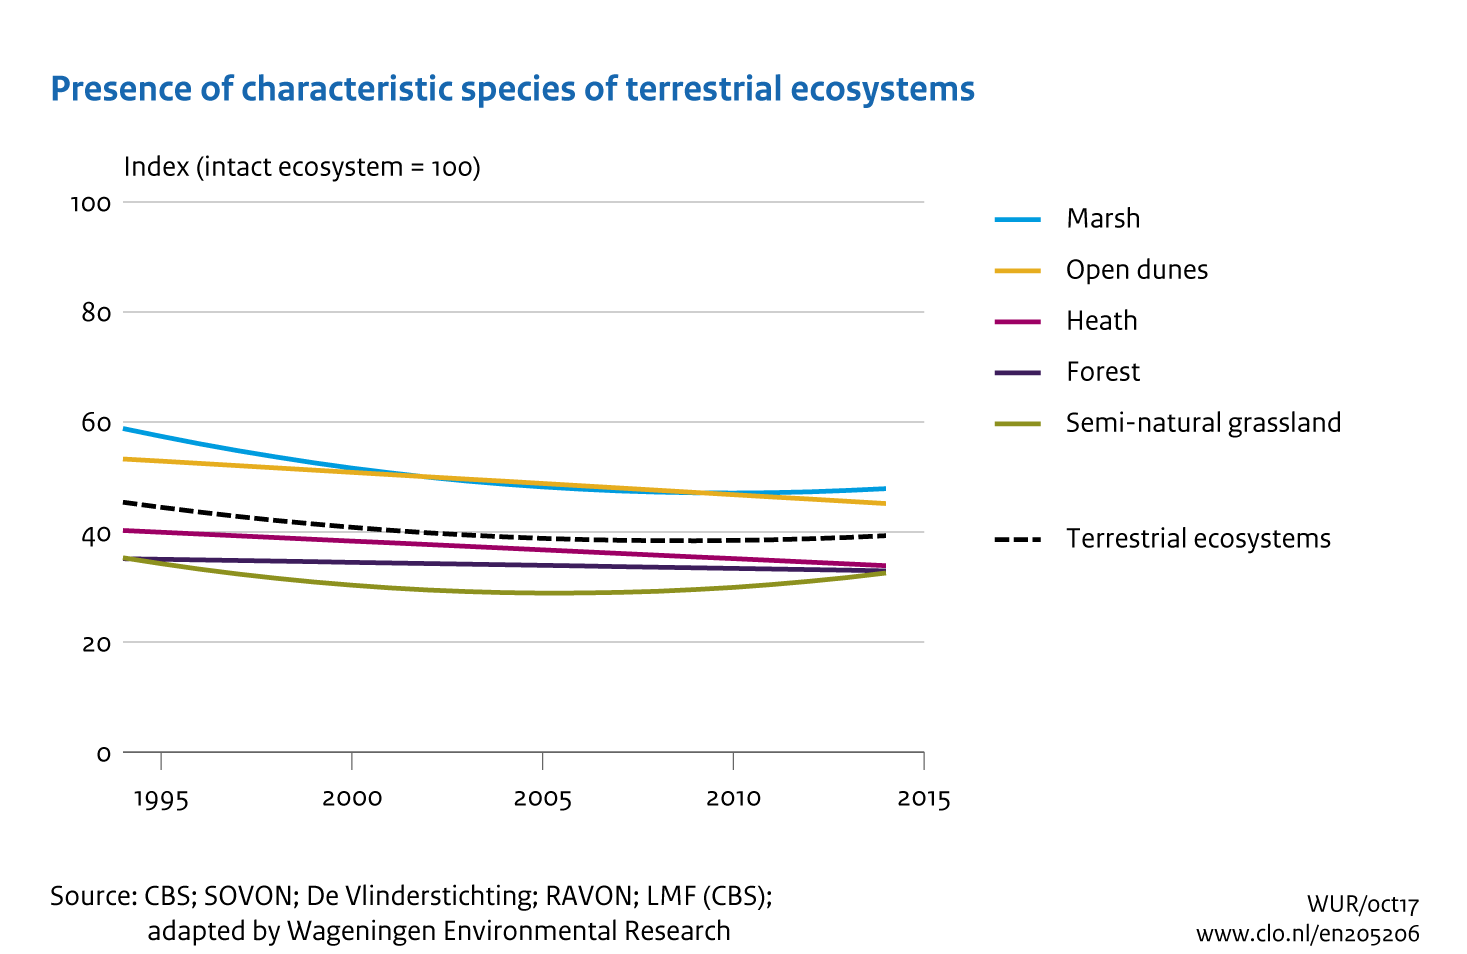 Image Presence of characteristic species of terrestrial ecosystems. The image is further explained in the text.